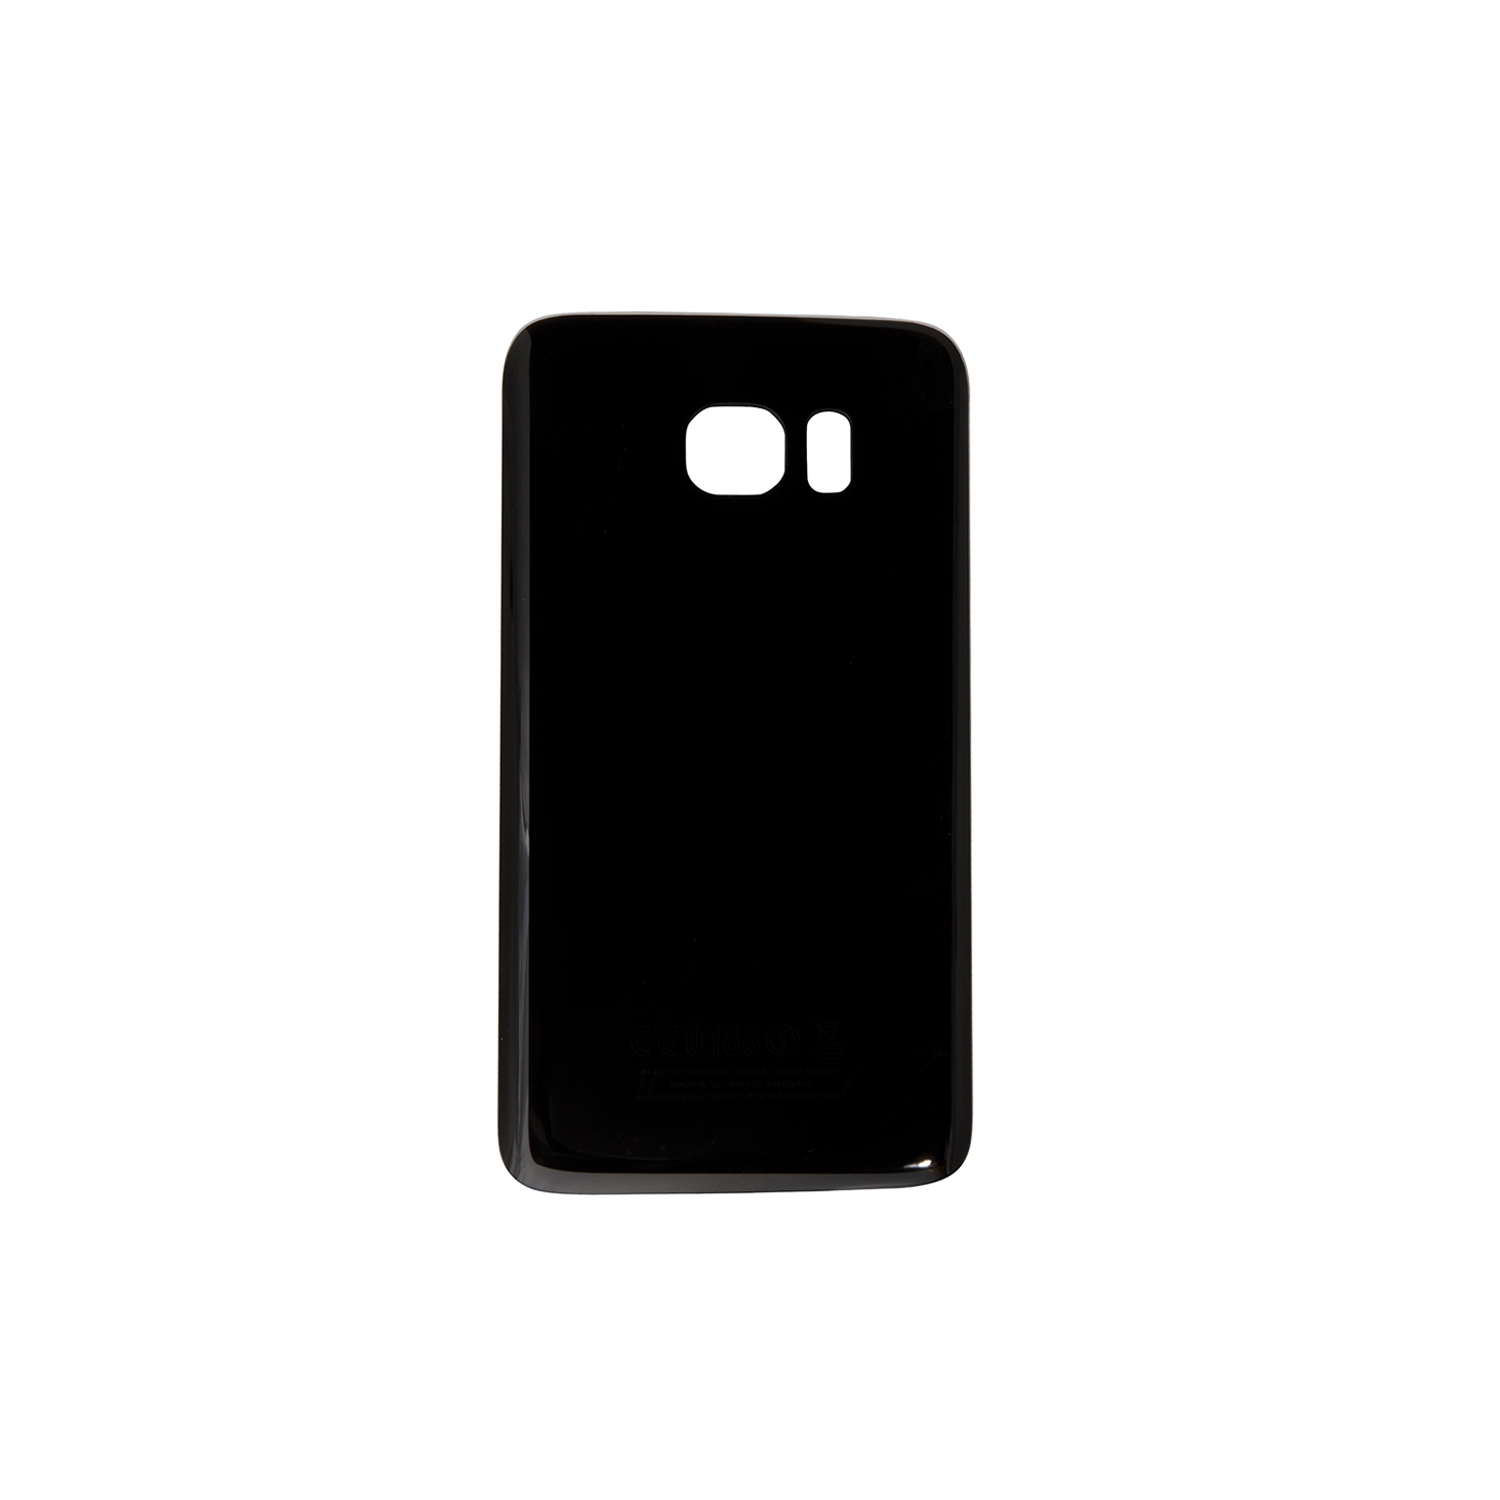 Samsung Galaxy S7 Edge G935W8 Back Housing Battery Door Cover Replacement - Black